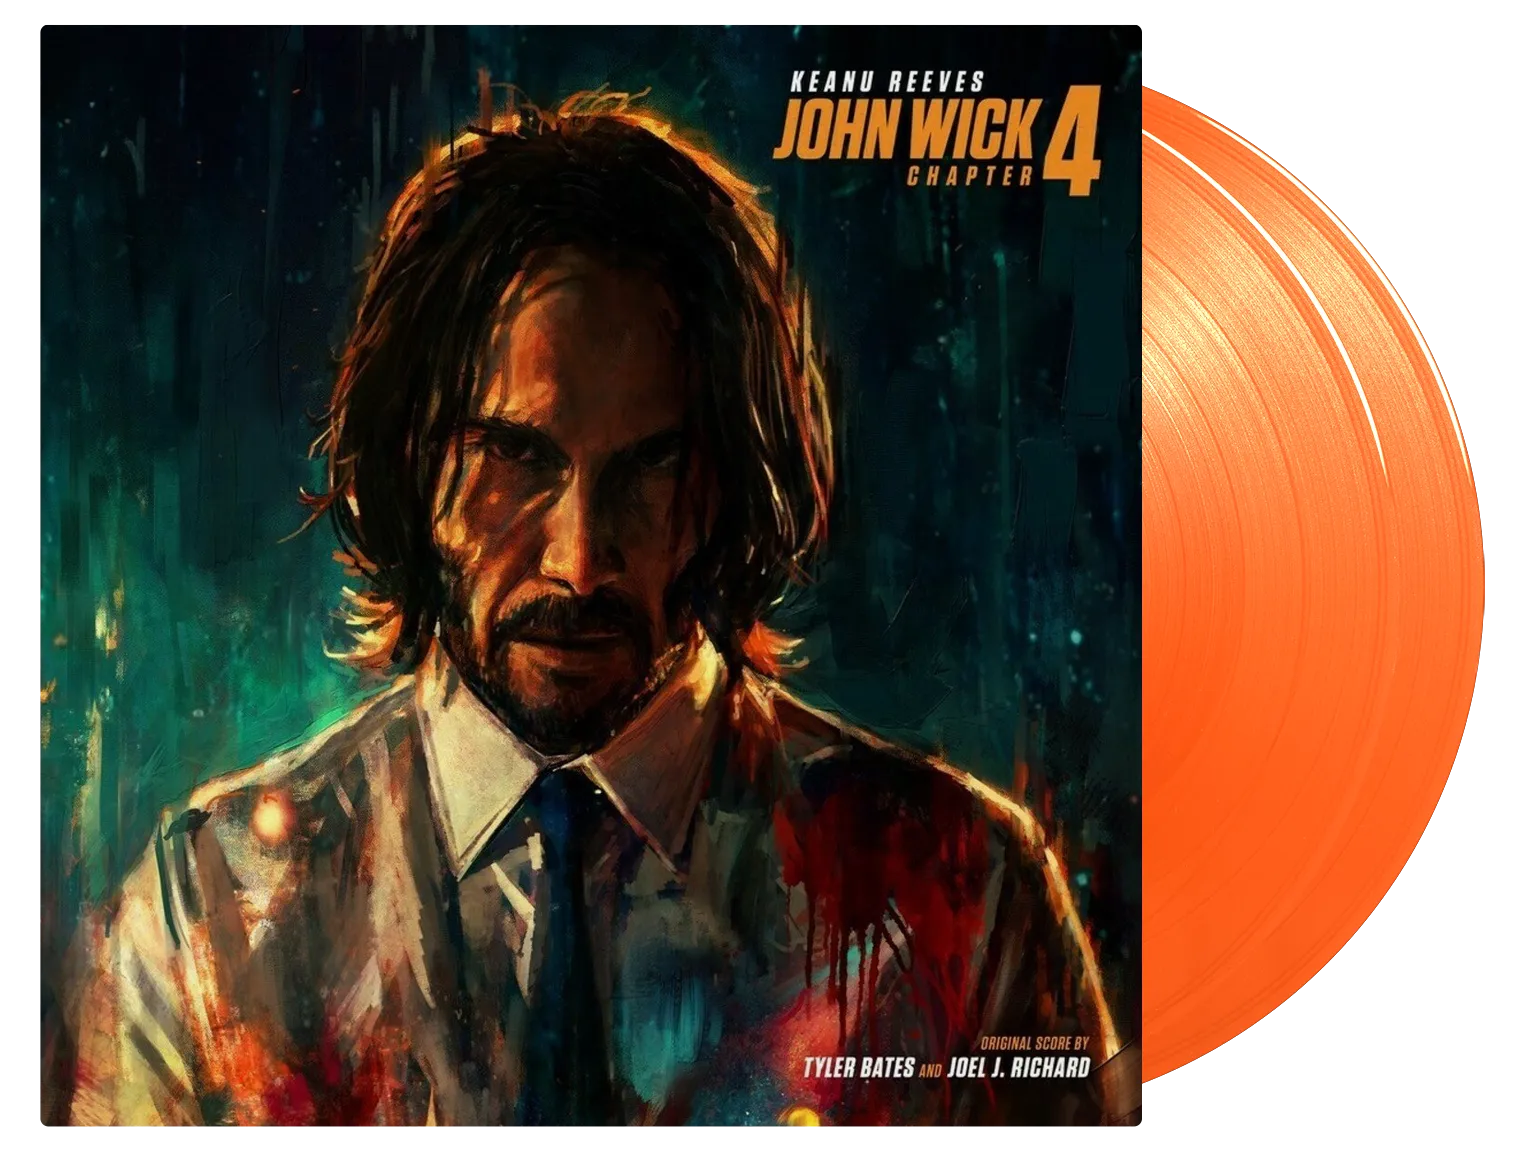 John Wick: Chapter 2 (Original Motion Picture Soundtrack) - Compilation by  Tyler Bates